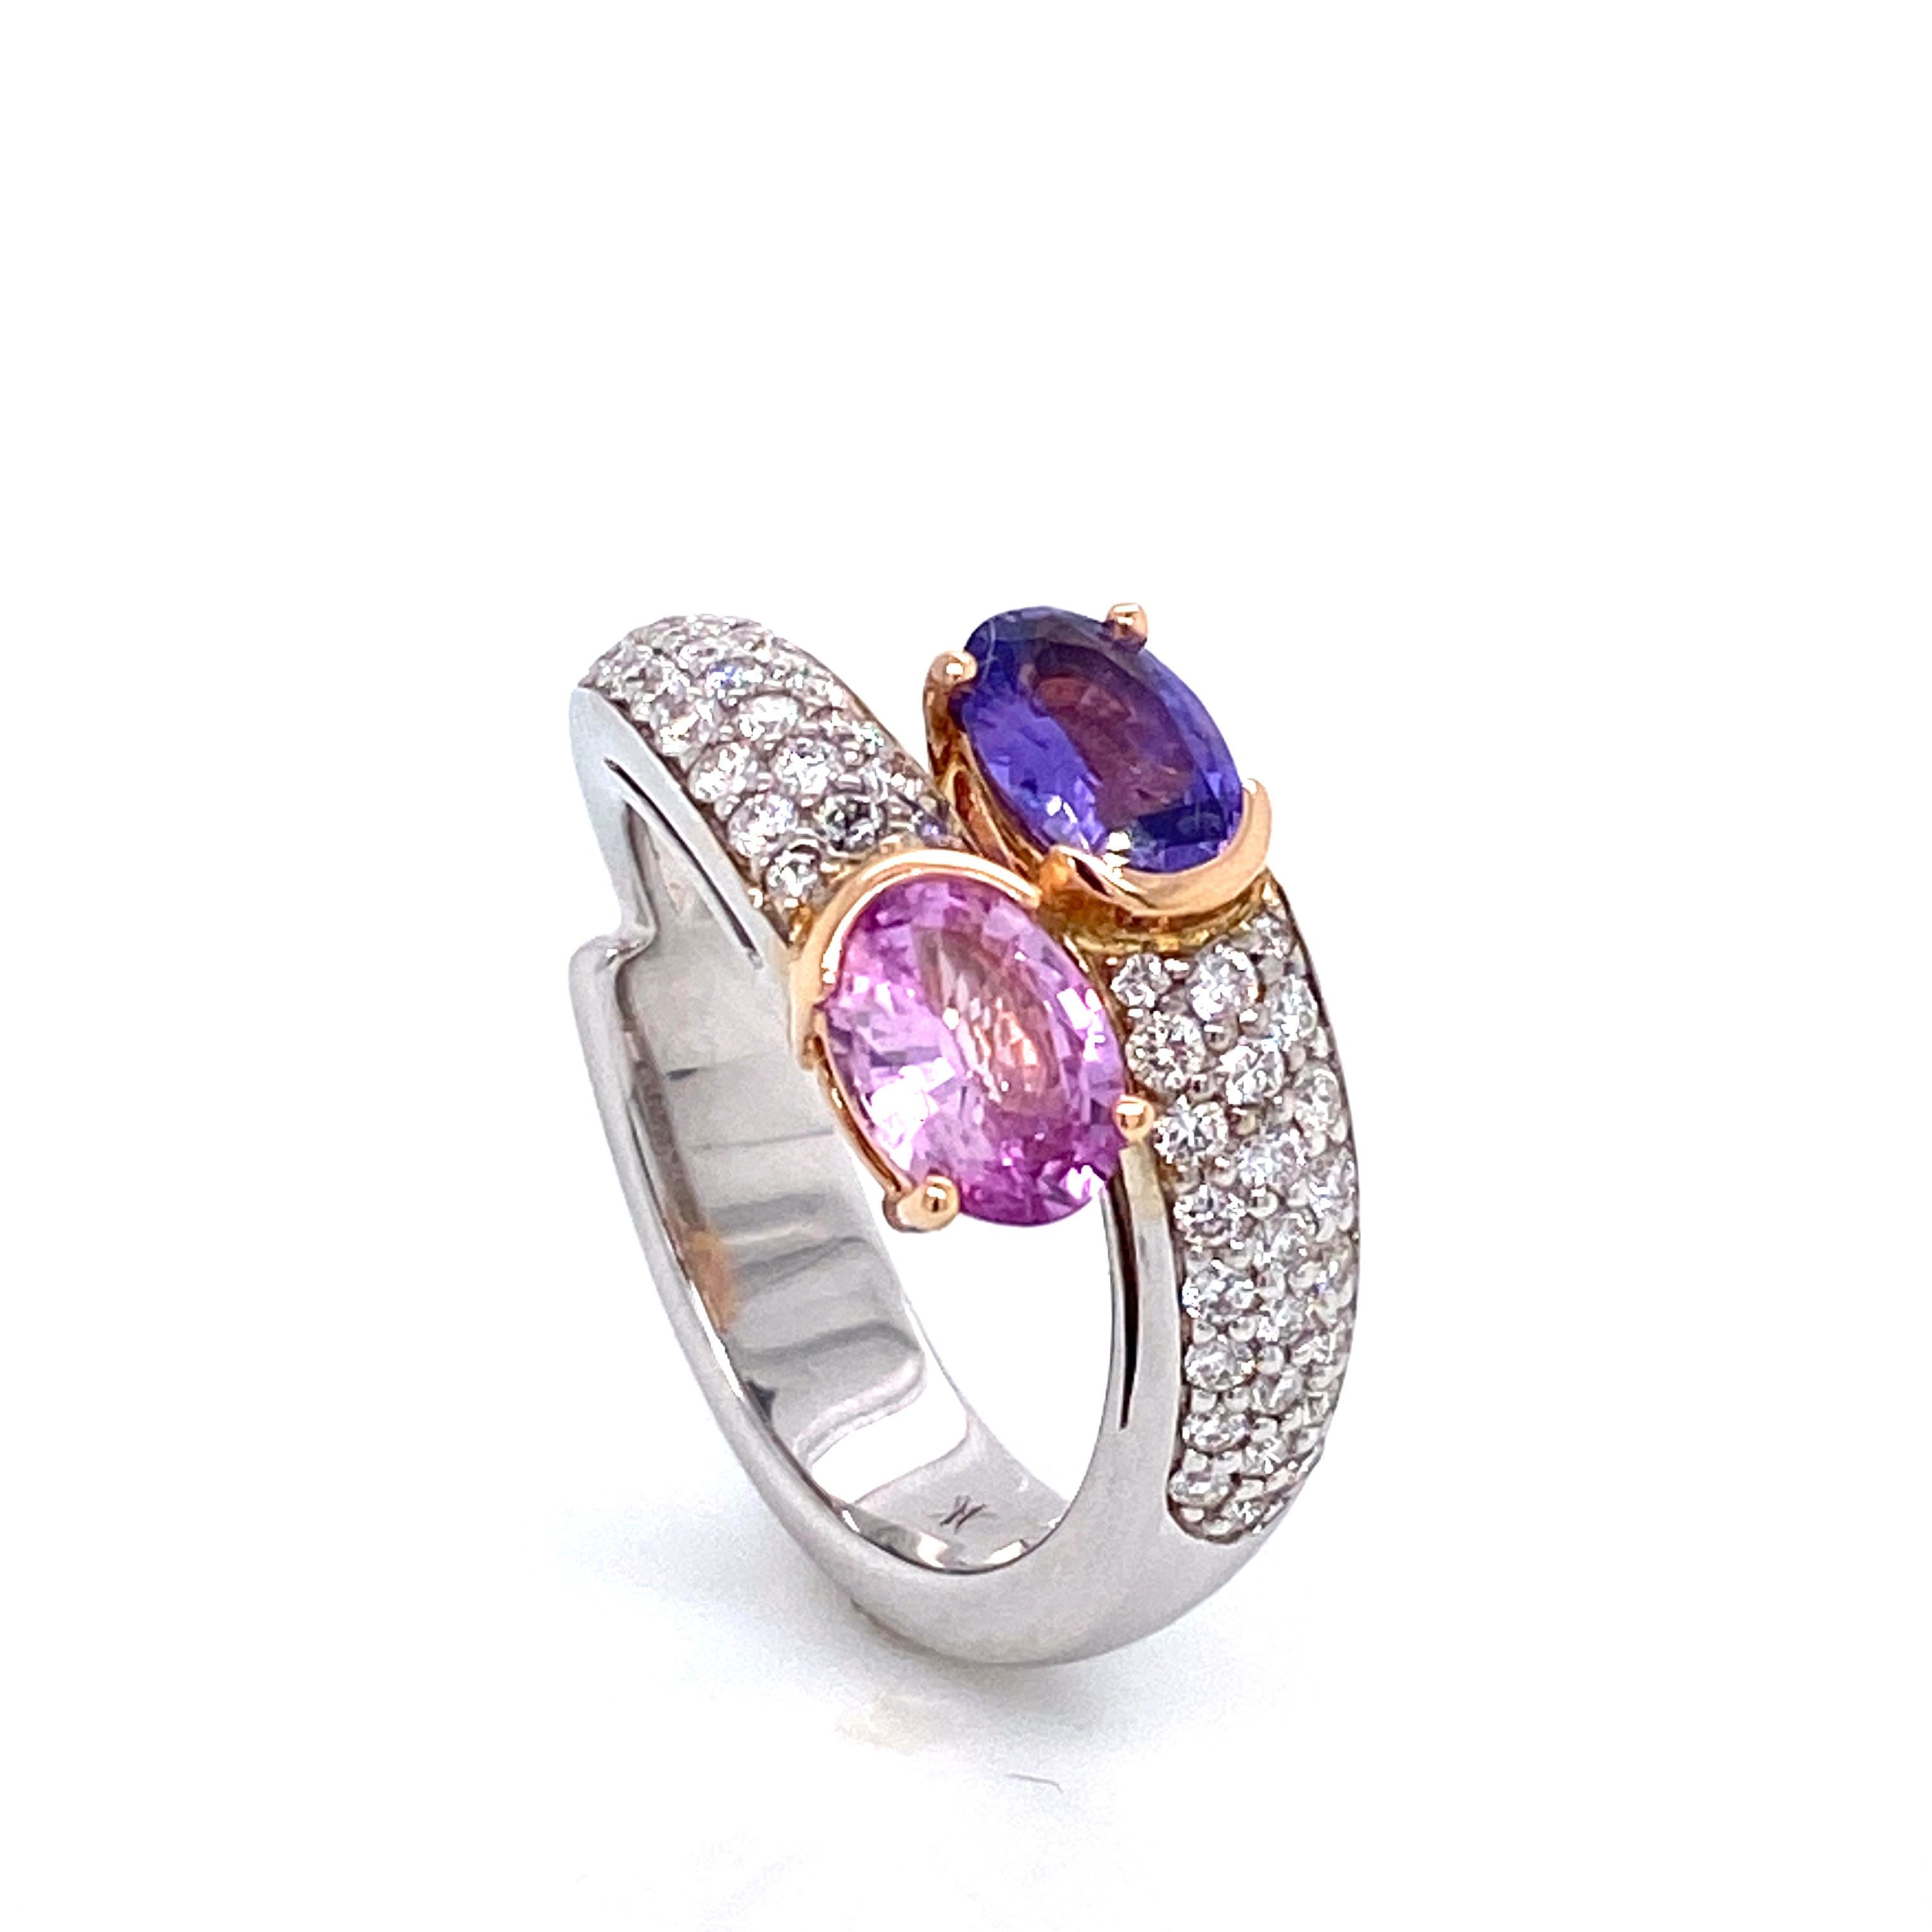 Pink Sapphire, Diamonds on white and Rose gold 18 k Bicolor Ring
White Gold and Rose Gold 18 K 
Weight Of Gold : 7.28 grams 
2 Unheated Sapphire Pink and Violet Color 1.65 cts 
48 Diamonds 0.49 cts 
French Size : 53.5
US Sise : 6 3/4
British Size :